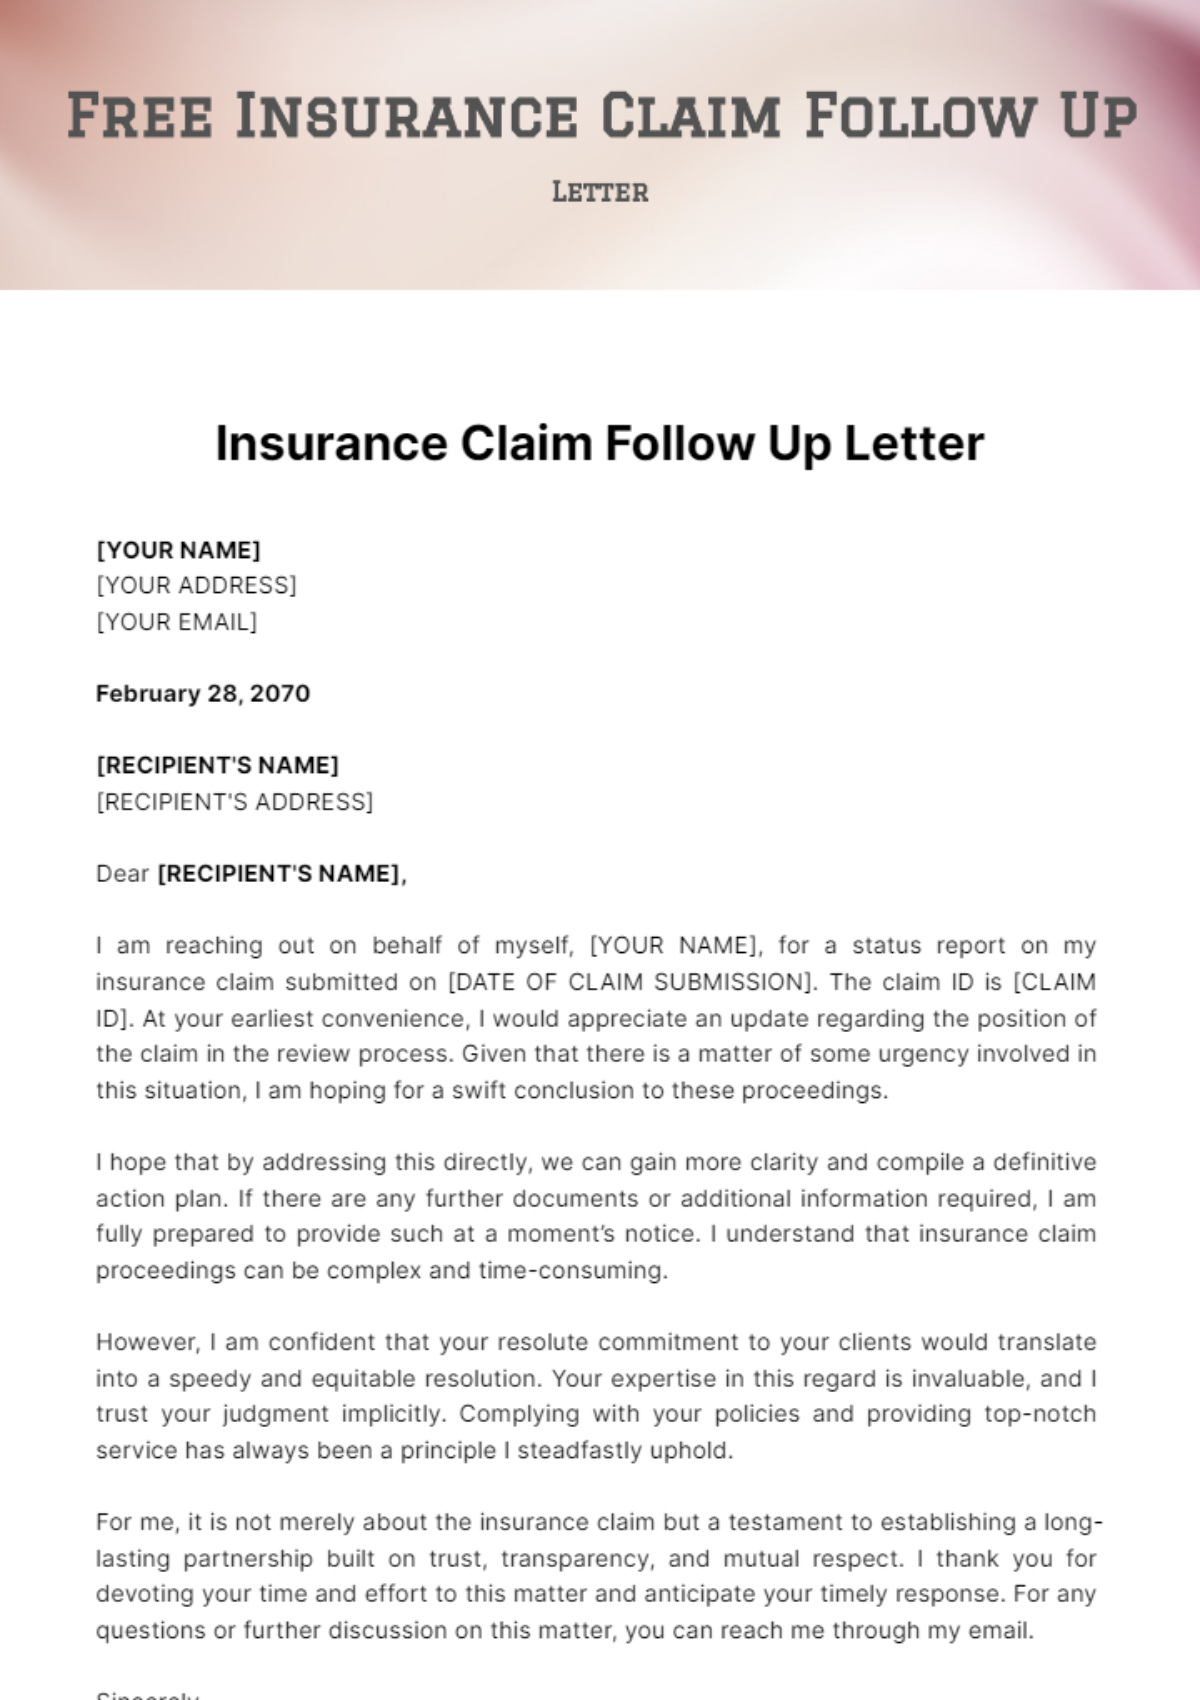 Free Insurance Claim Follow Up Letter Template